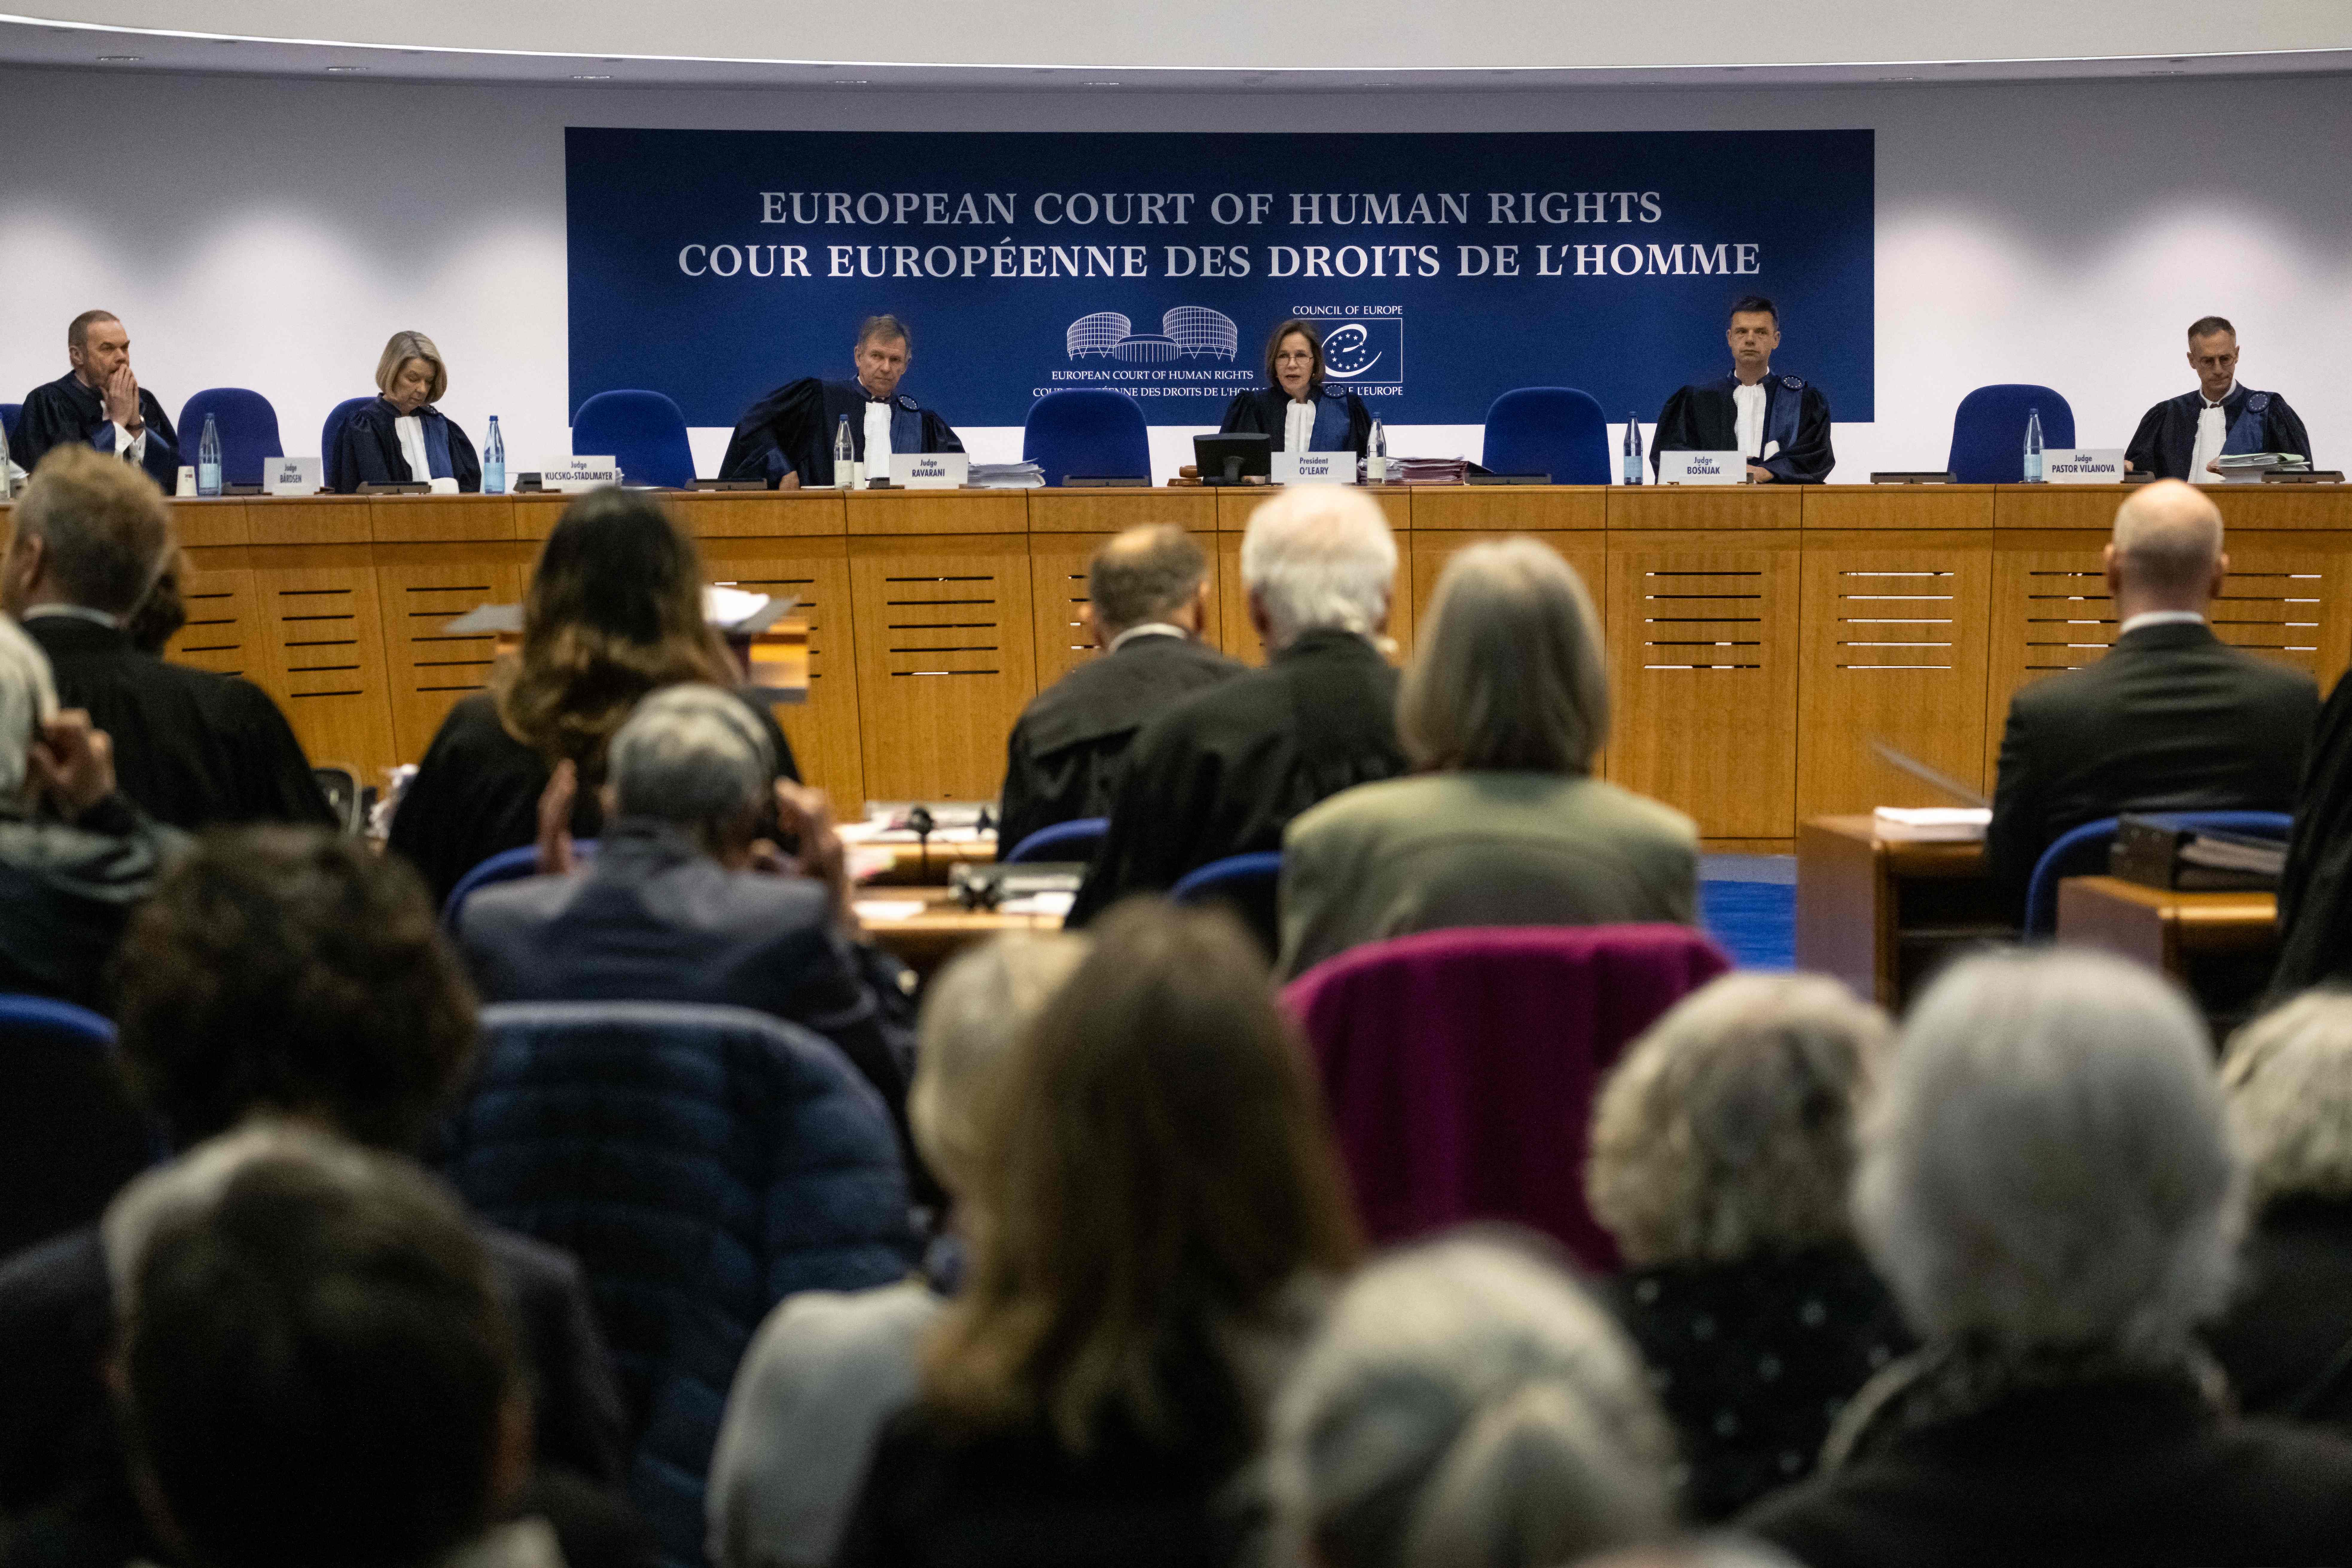 The court members of the European Court of Human Rights opens the hearing in two climate change cases involving France and Switzerland, in Strasbourg, eastern France on March 29, 2023. - In a first, the European Court of Human Rights (ECHR) on March 29, 2023, began hearing two climate change-related applications against France and Switzerland for failing to take sufficient action against its effects. (Photo by PATRICK HERTZOG/AFP via Getty Images)